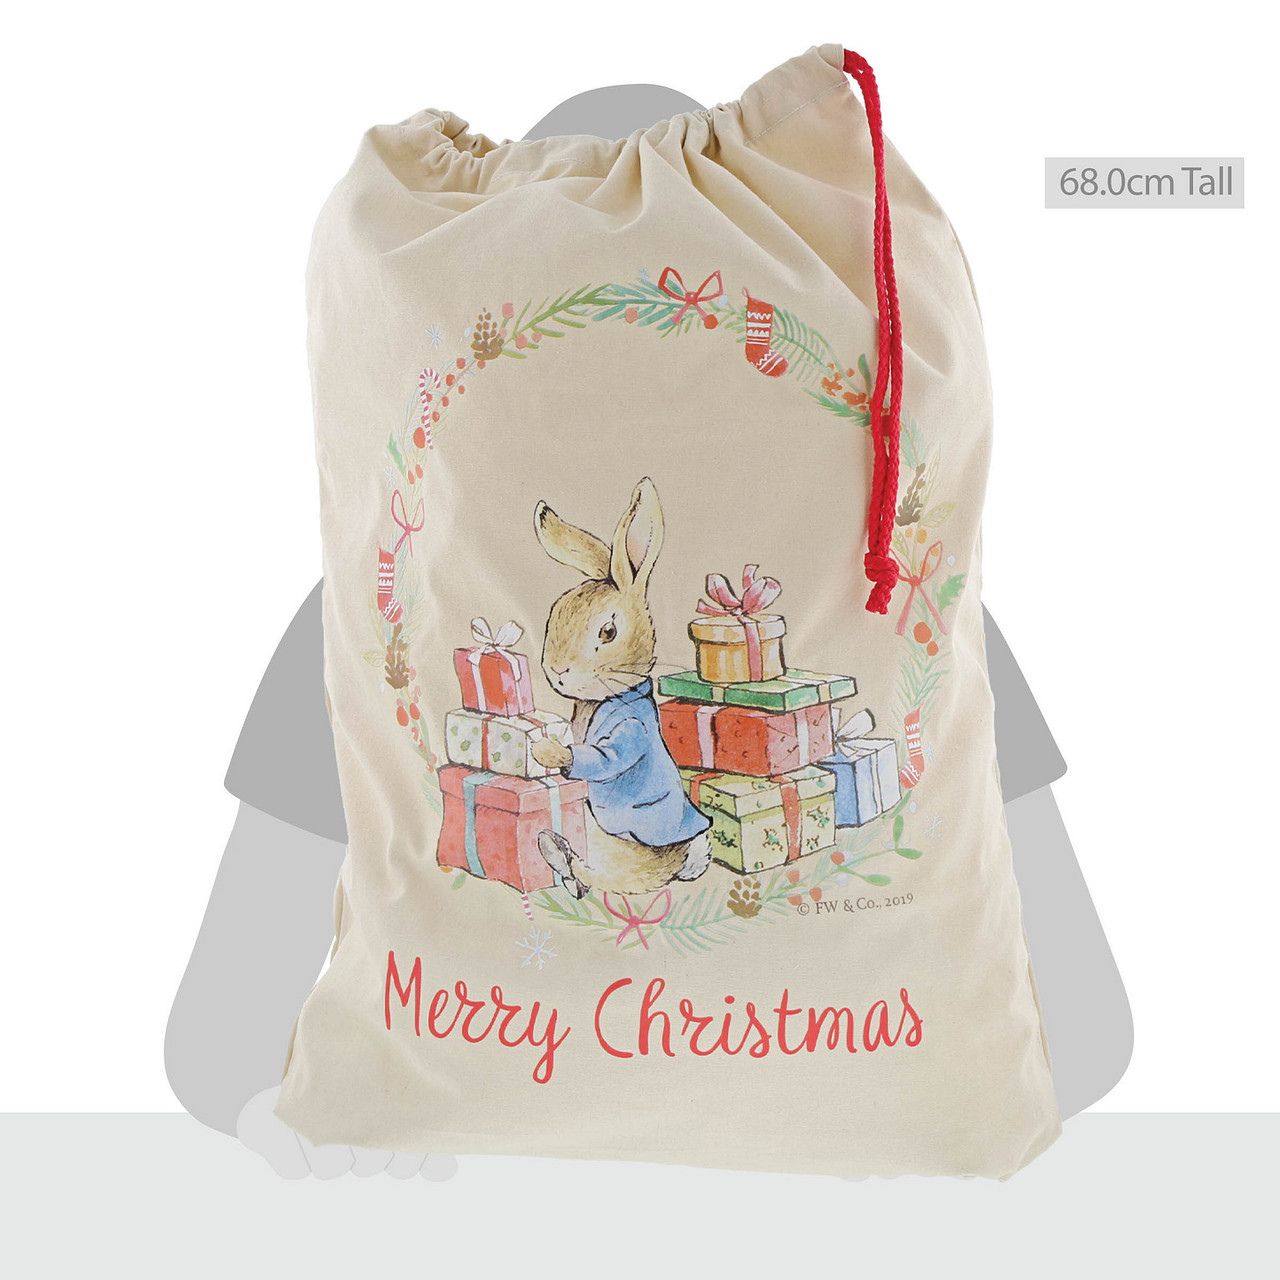 Peter Rabbit Christmas Sack  This Charming Peter Rabbit Christmas sack makes a brilliant alternative to a Christmas stocking, so why not make a new tradition this Christmas. Made of 100% cotton, this Christmas sack is durable and can be used year after year. It is large enough to fit lots of presents in for Christmas morning and looks great underneath the tree. 